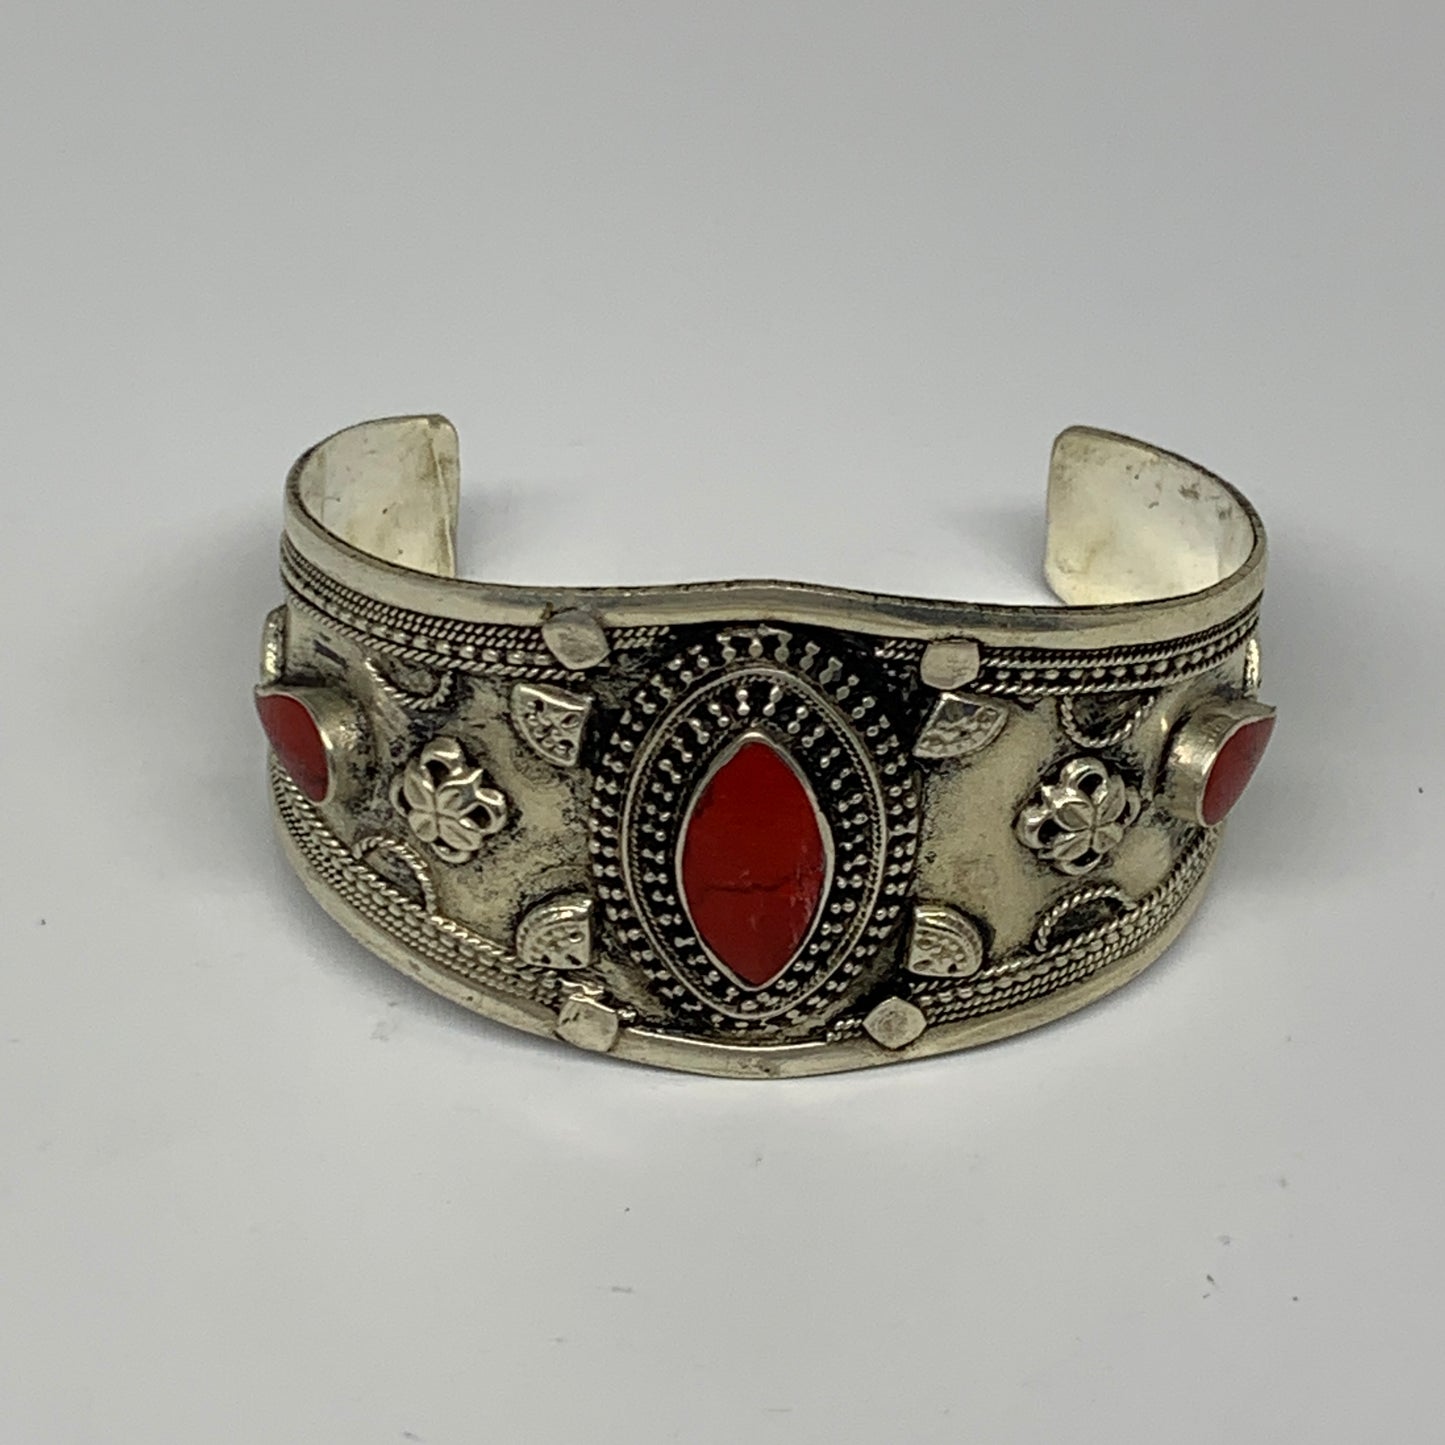 29.3g, 1.6" Turkmen Cuff Bracelet Tribal Small Marquise, Red Coral Inlay, B13496